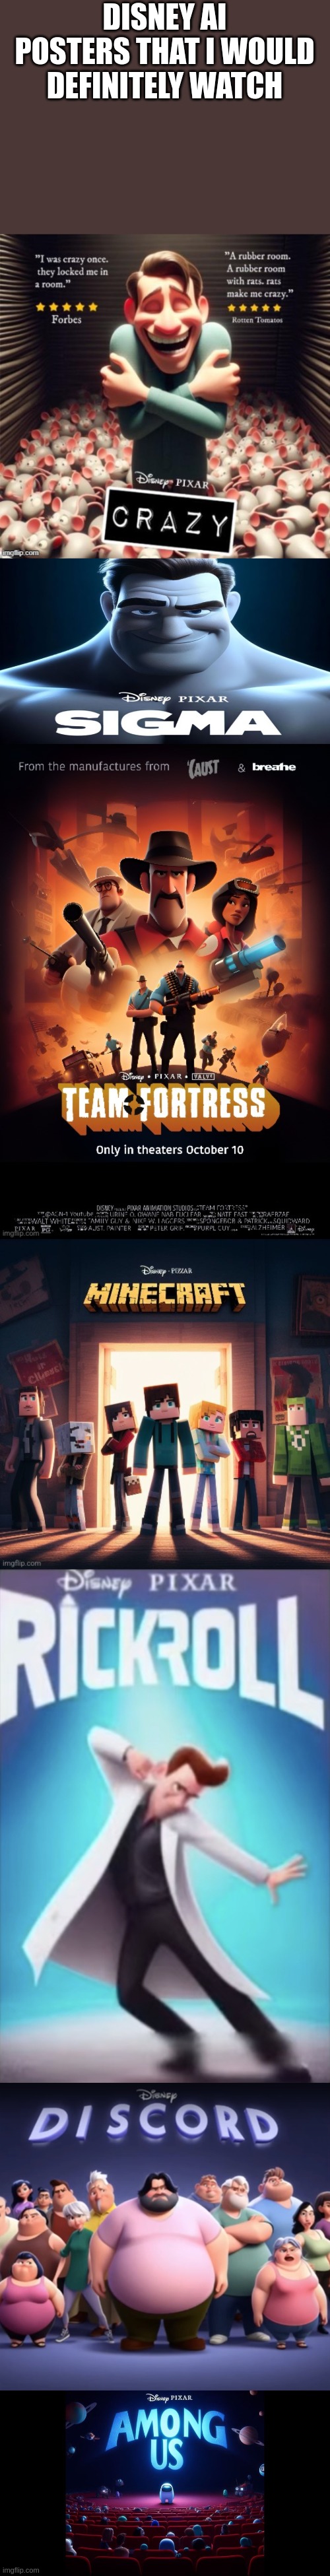 DISNEY AI POSTERS THAT I WOULD DEFINITELY WATCH | image tagged in disney pixar crazy,disney pixar team fortress,disney pixar minecraft,disney pixar rickroll | made w/ Imgflip meme maker